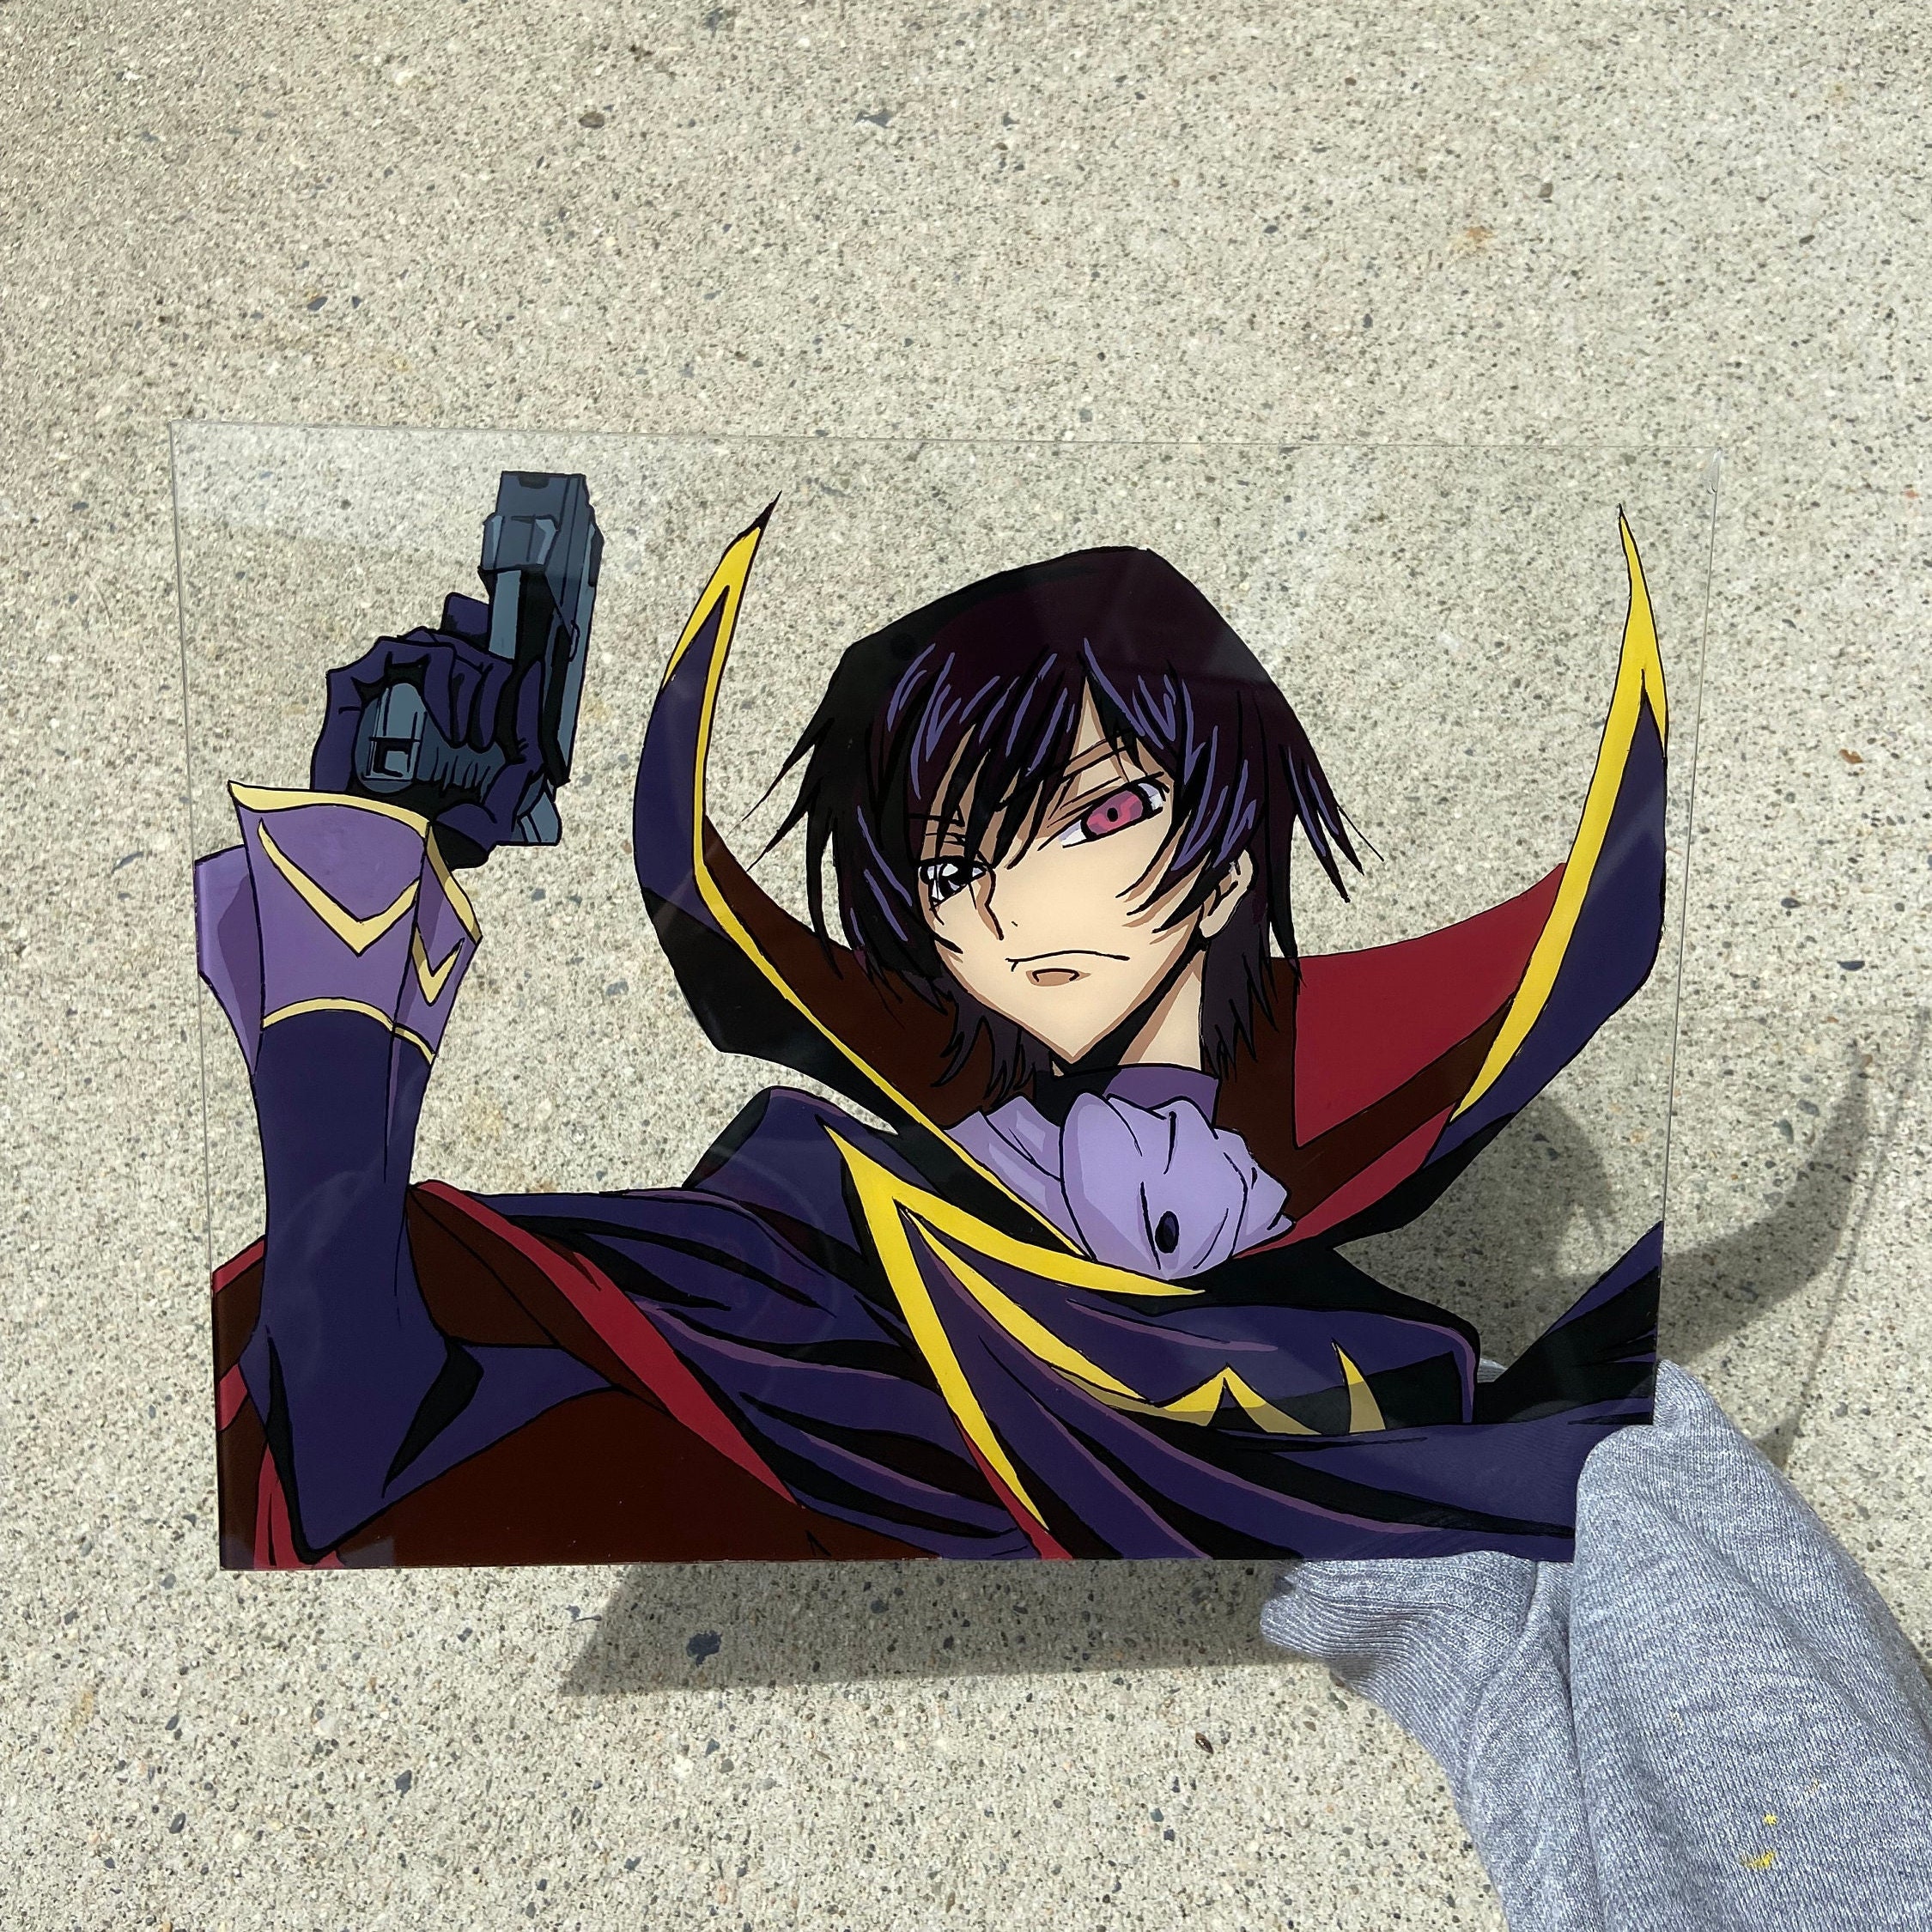 Day Gift for code geass Lelouch Lamperouge Ornament by Anime-Video